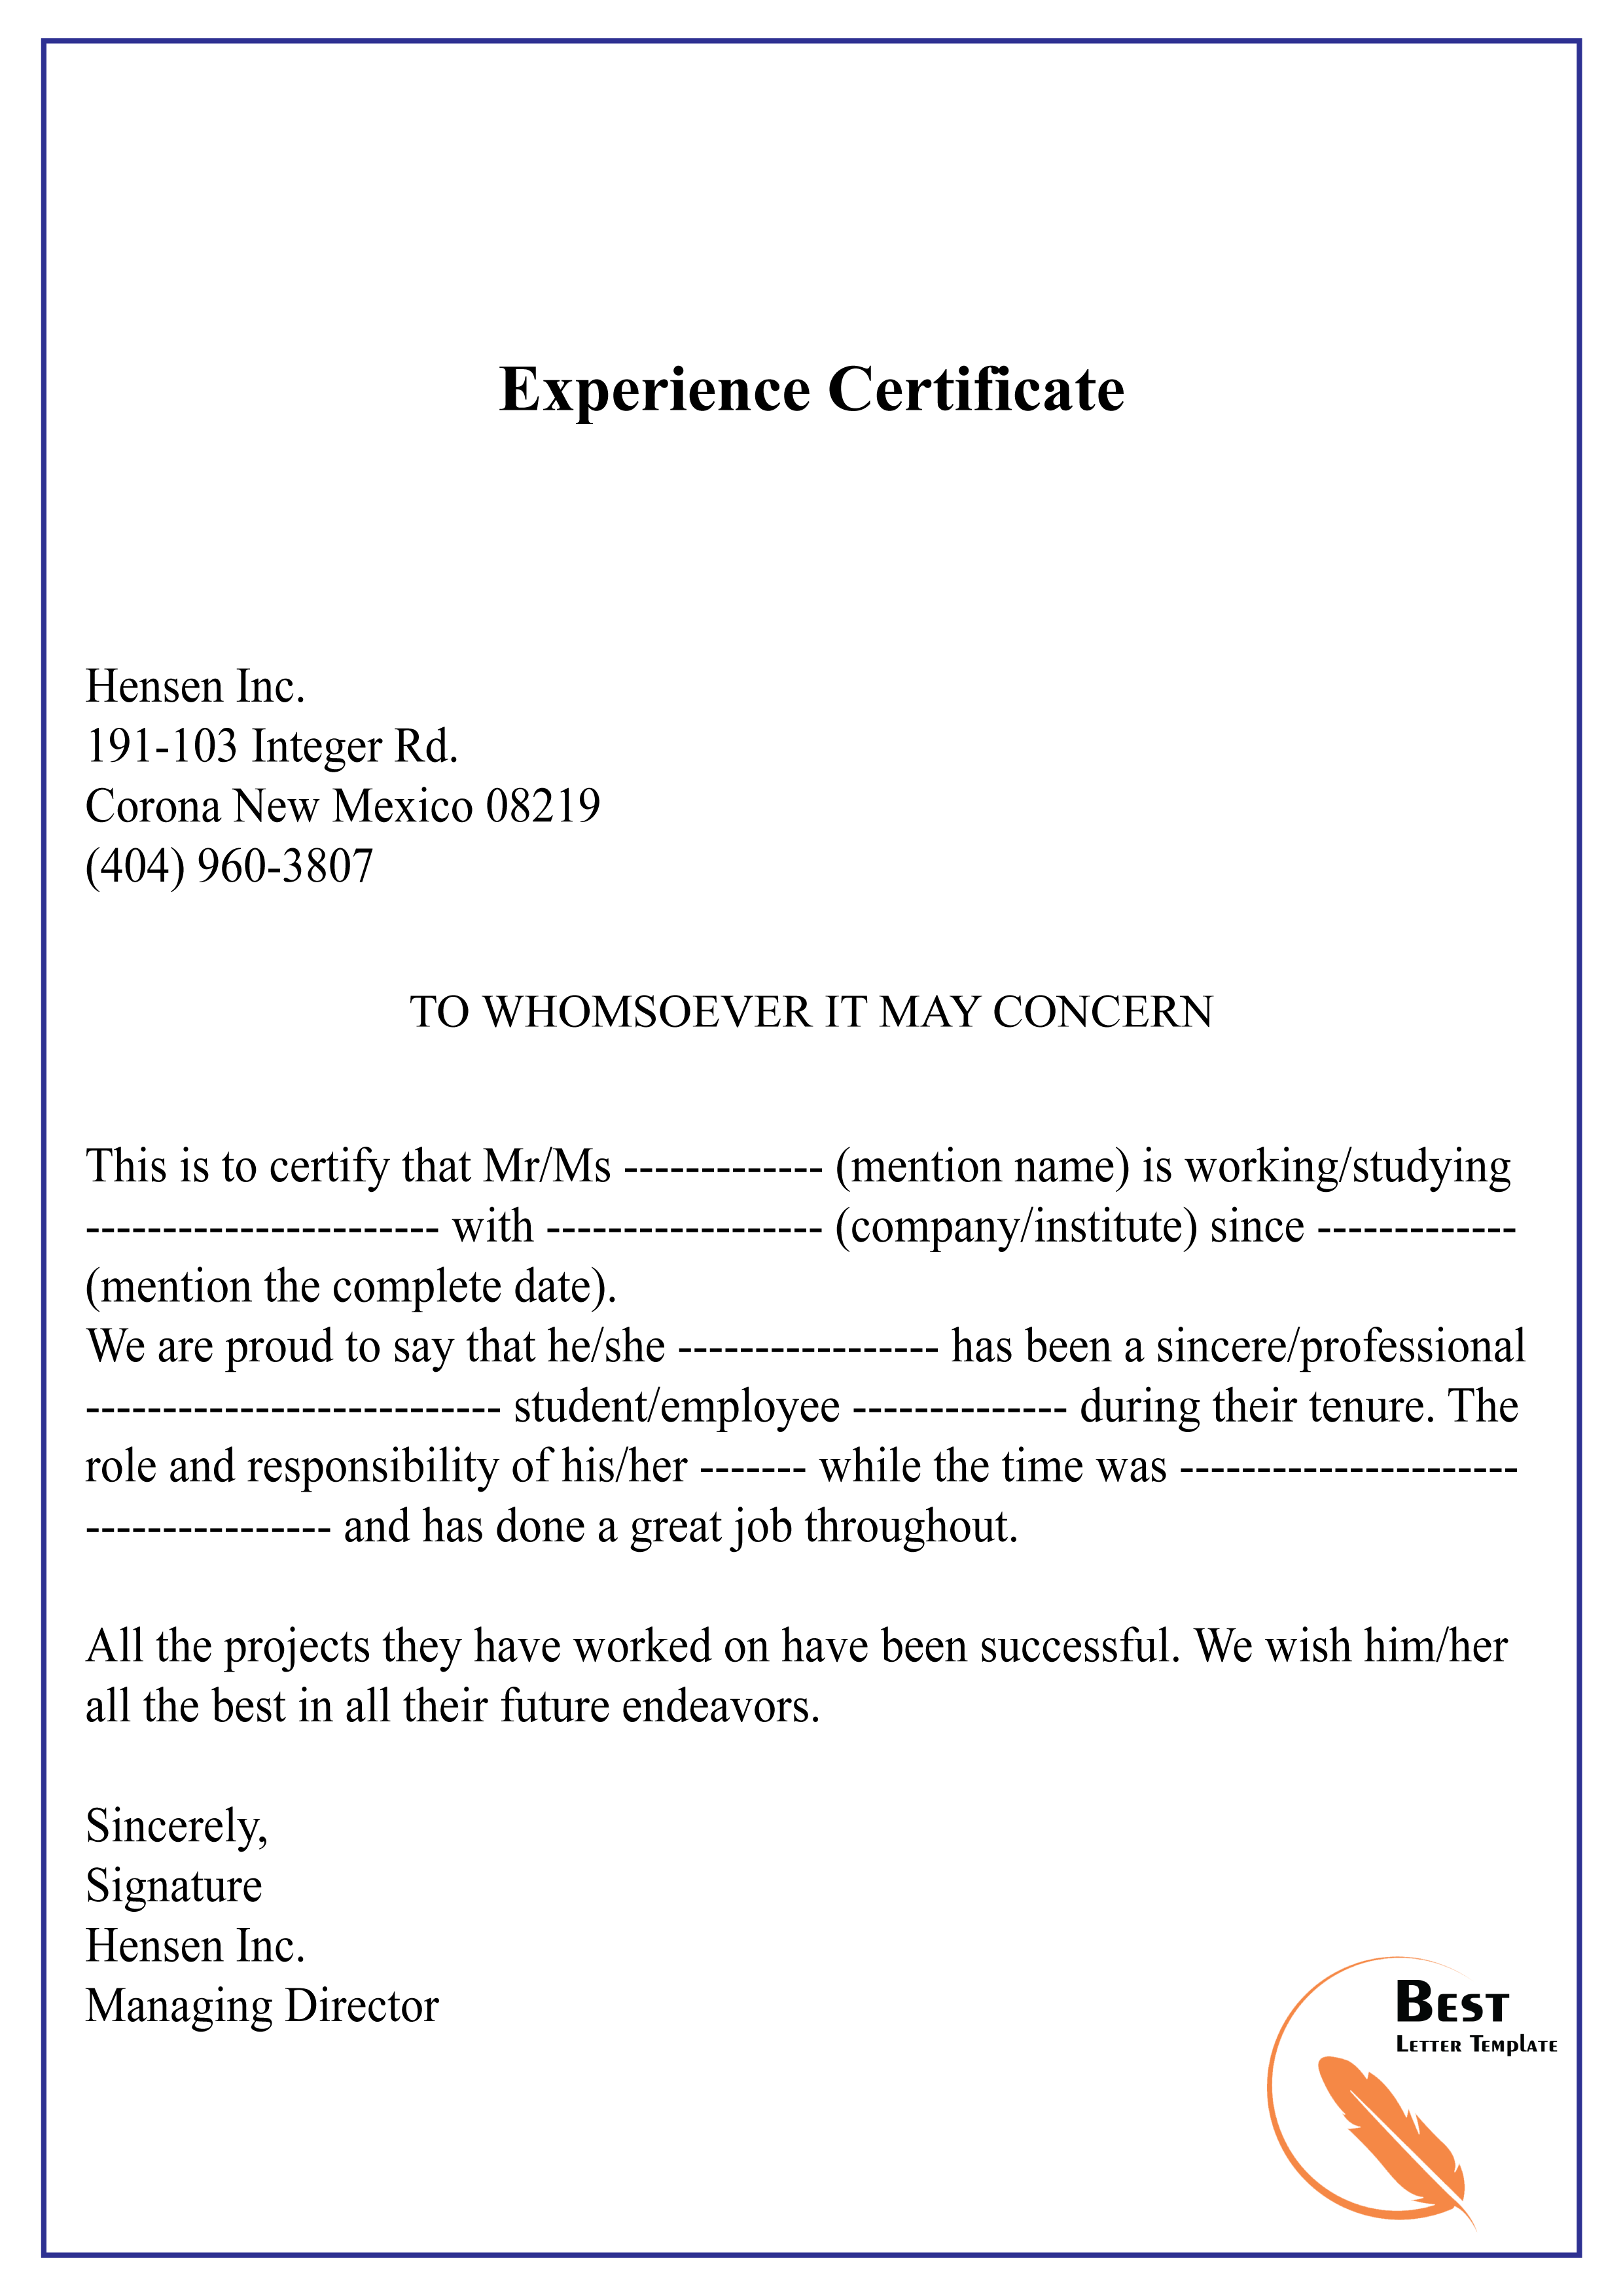 To Whomsoever It May Concern Experience Certificate Letter